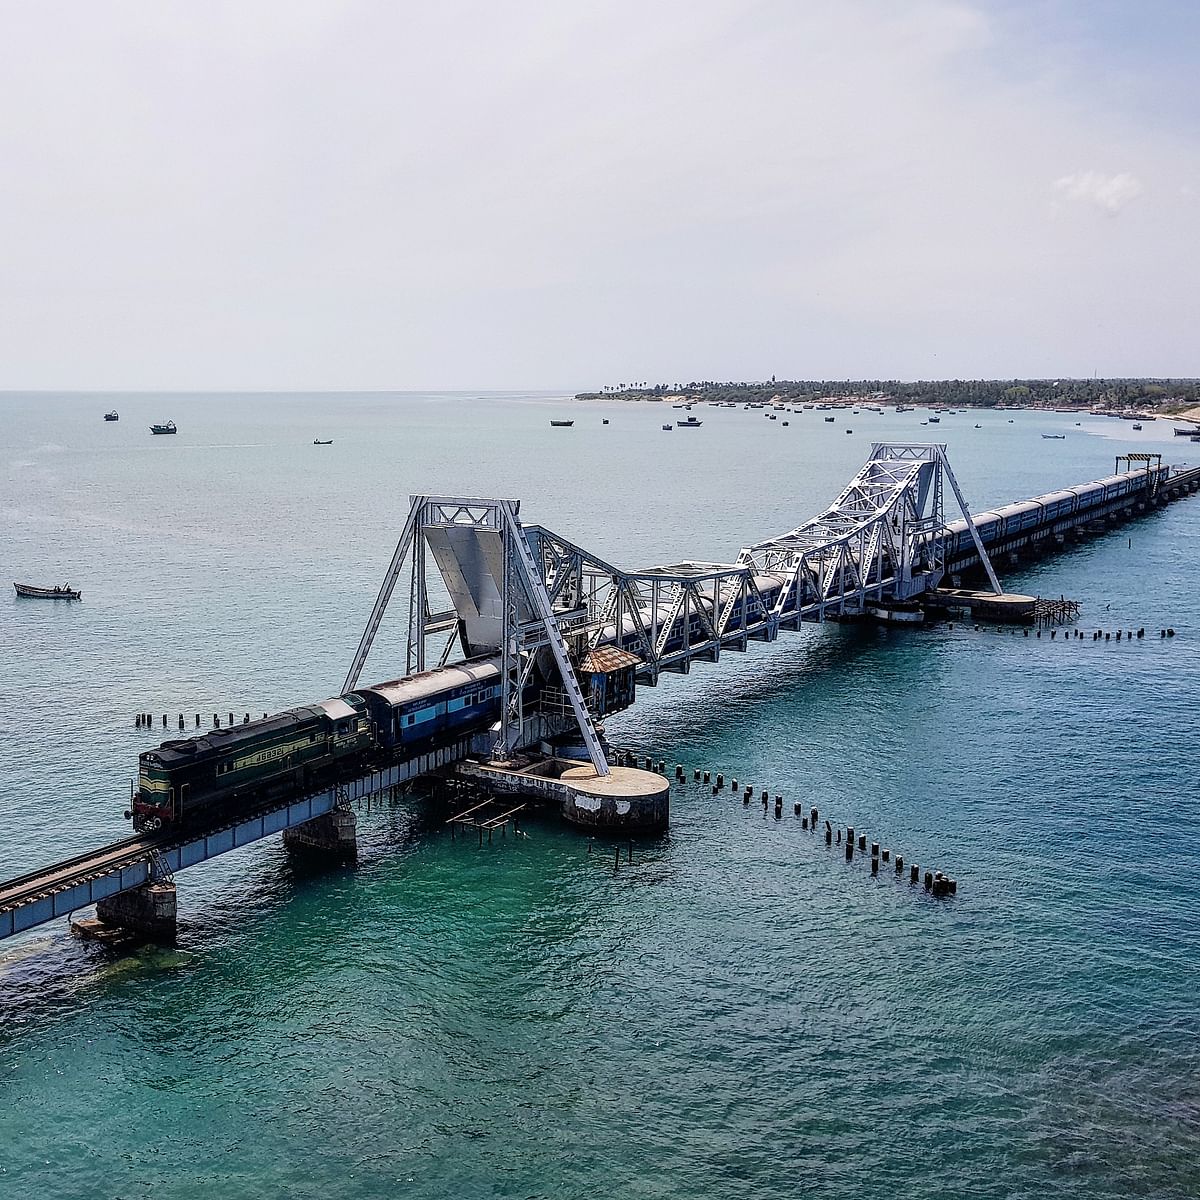 I’d been waiting for this moment ever since I saw a stunning image of a train emerge from India’s first sea bridge.